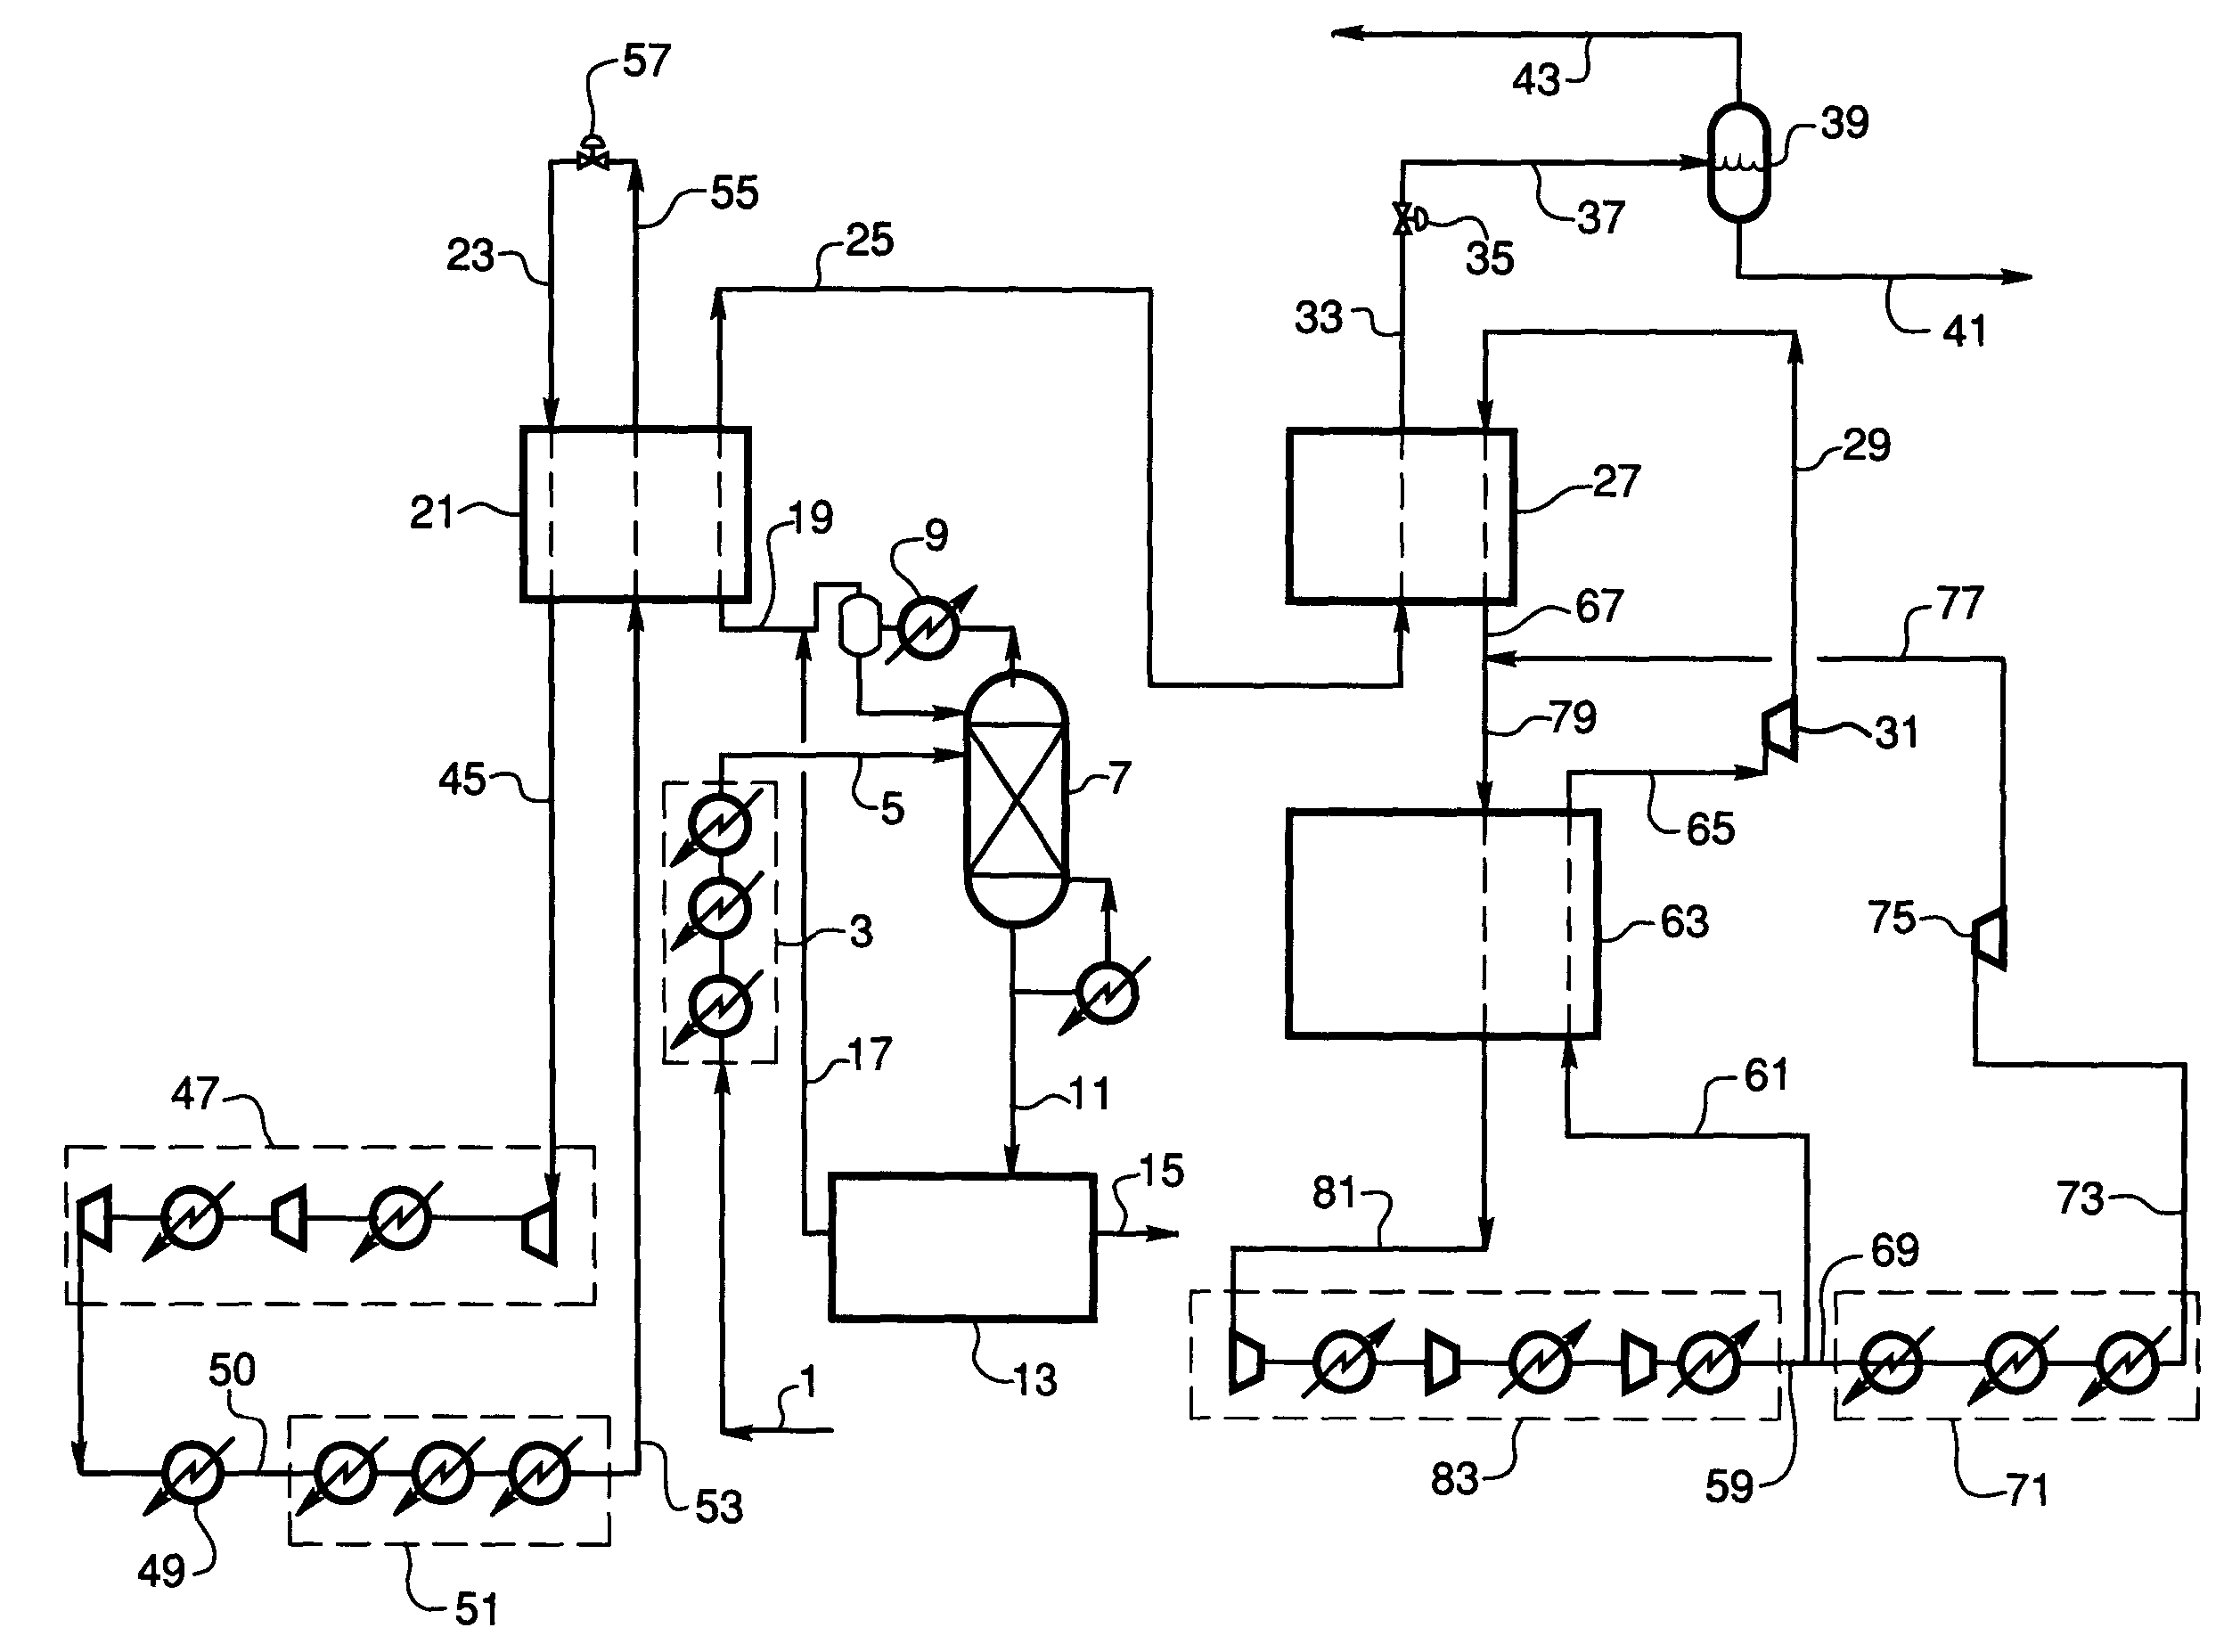 Hybrid gas liquefaction cycle with multiple expanders